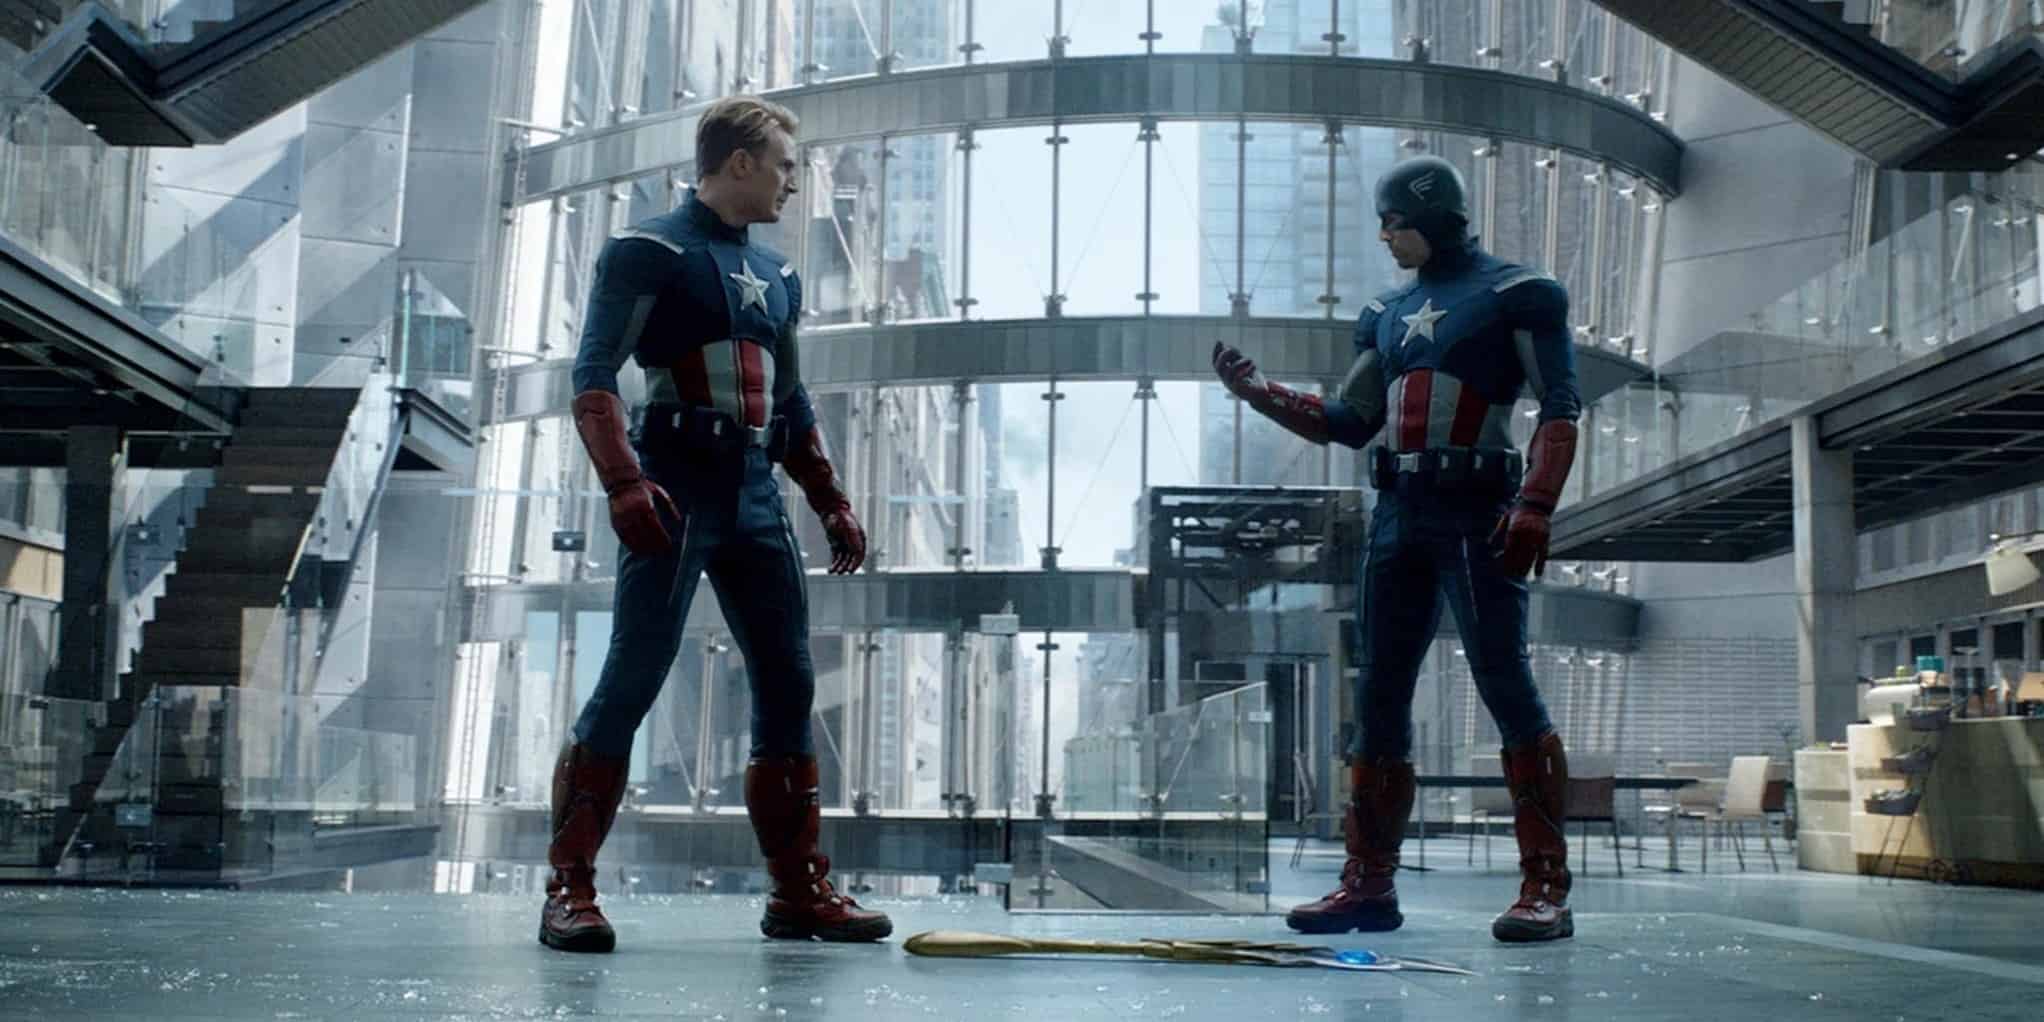 Captain America faces off against himself in this photo from Marvel Studios.